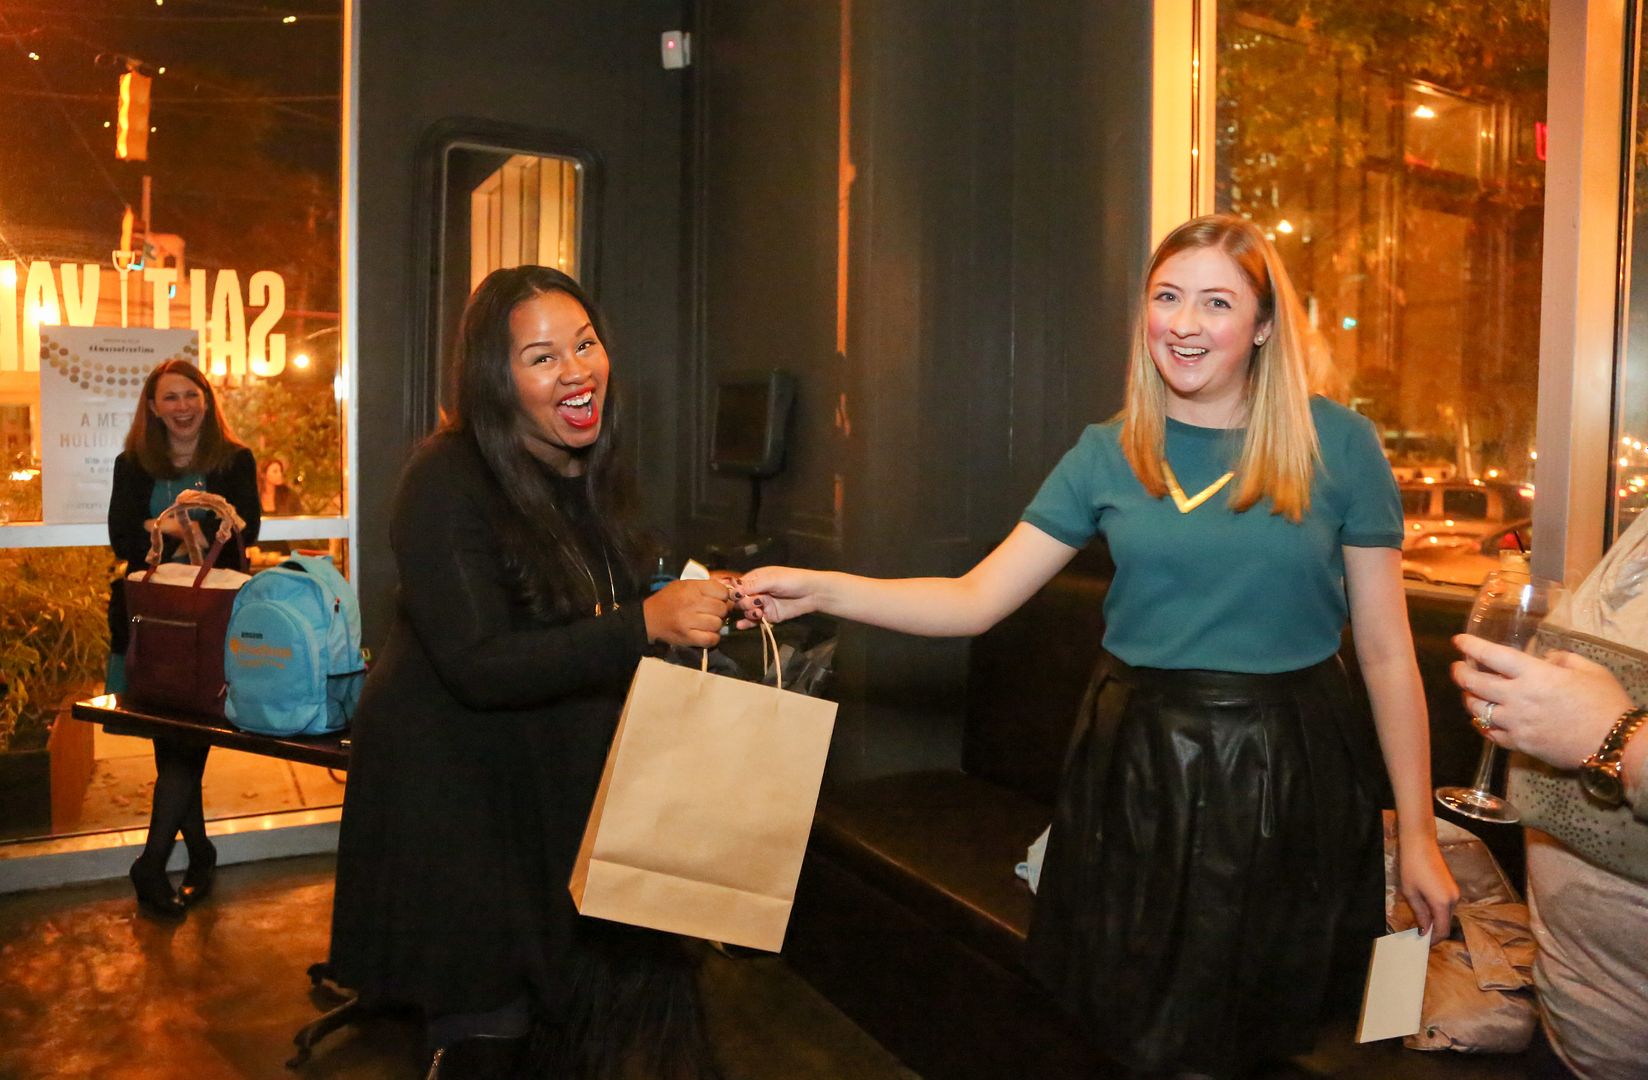 Amazon Cool Mom Picks holiday party: The winner!